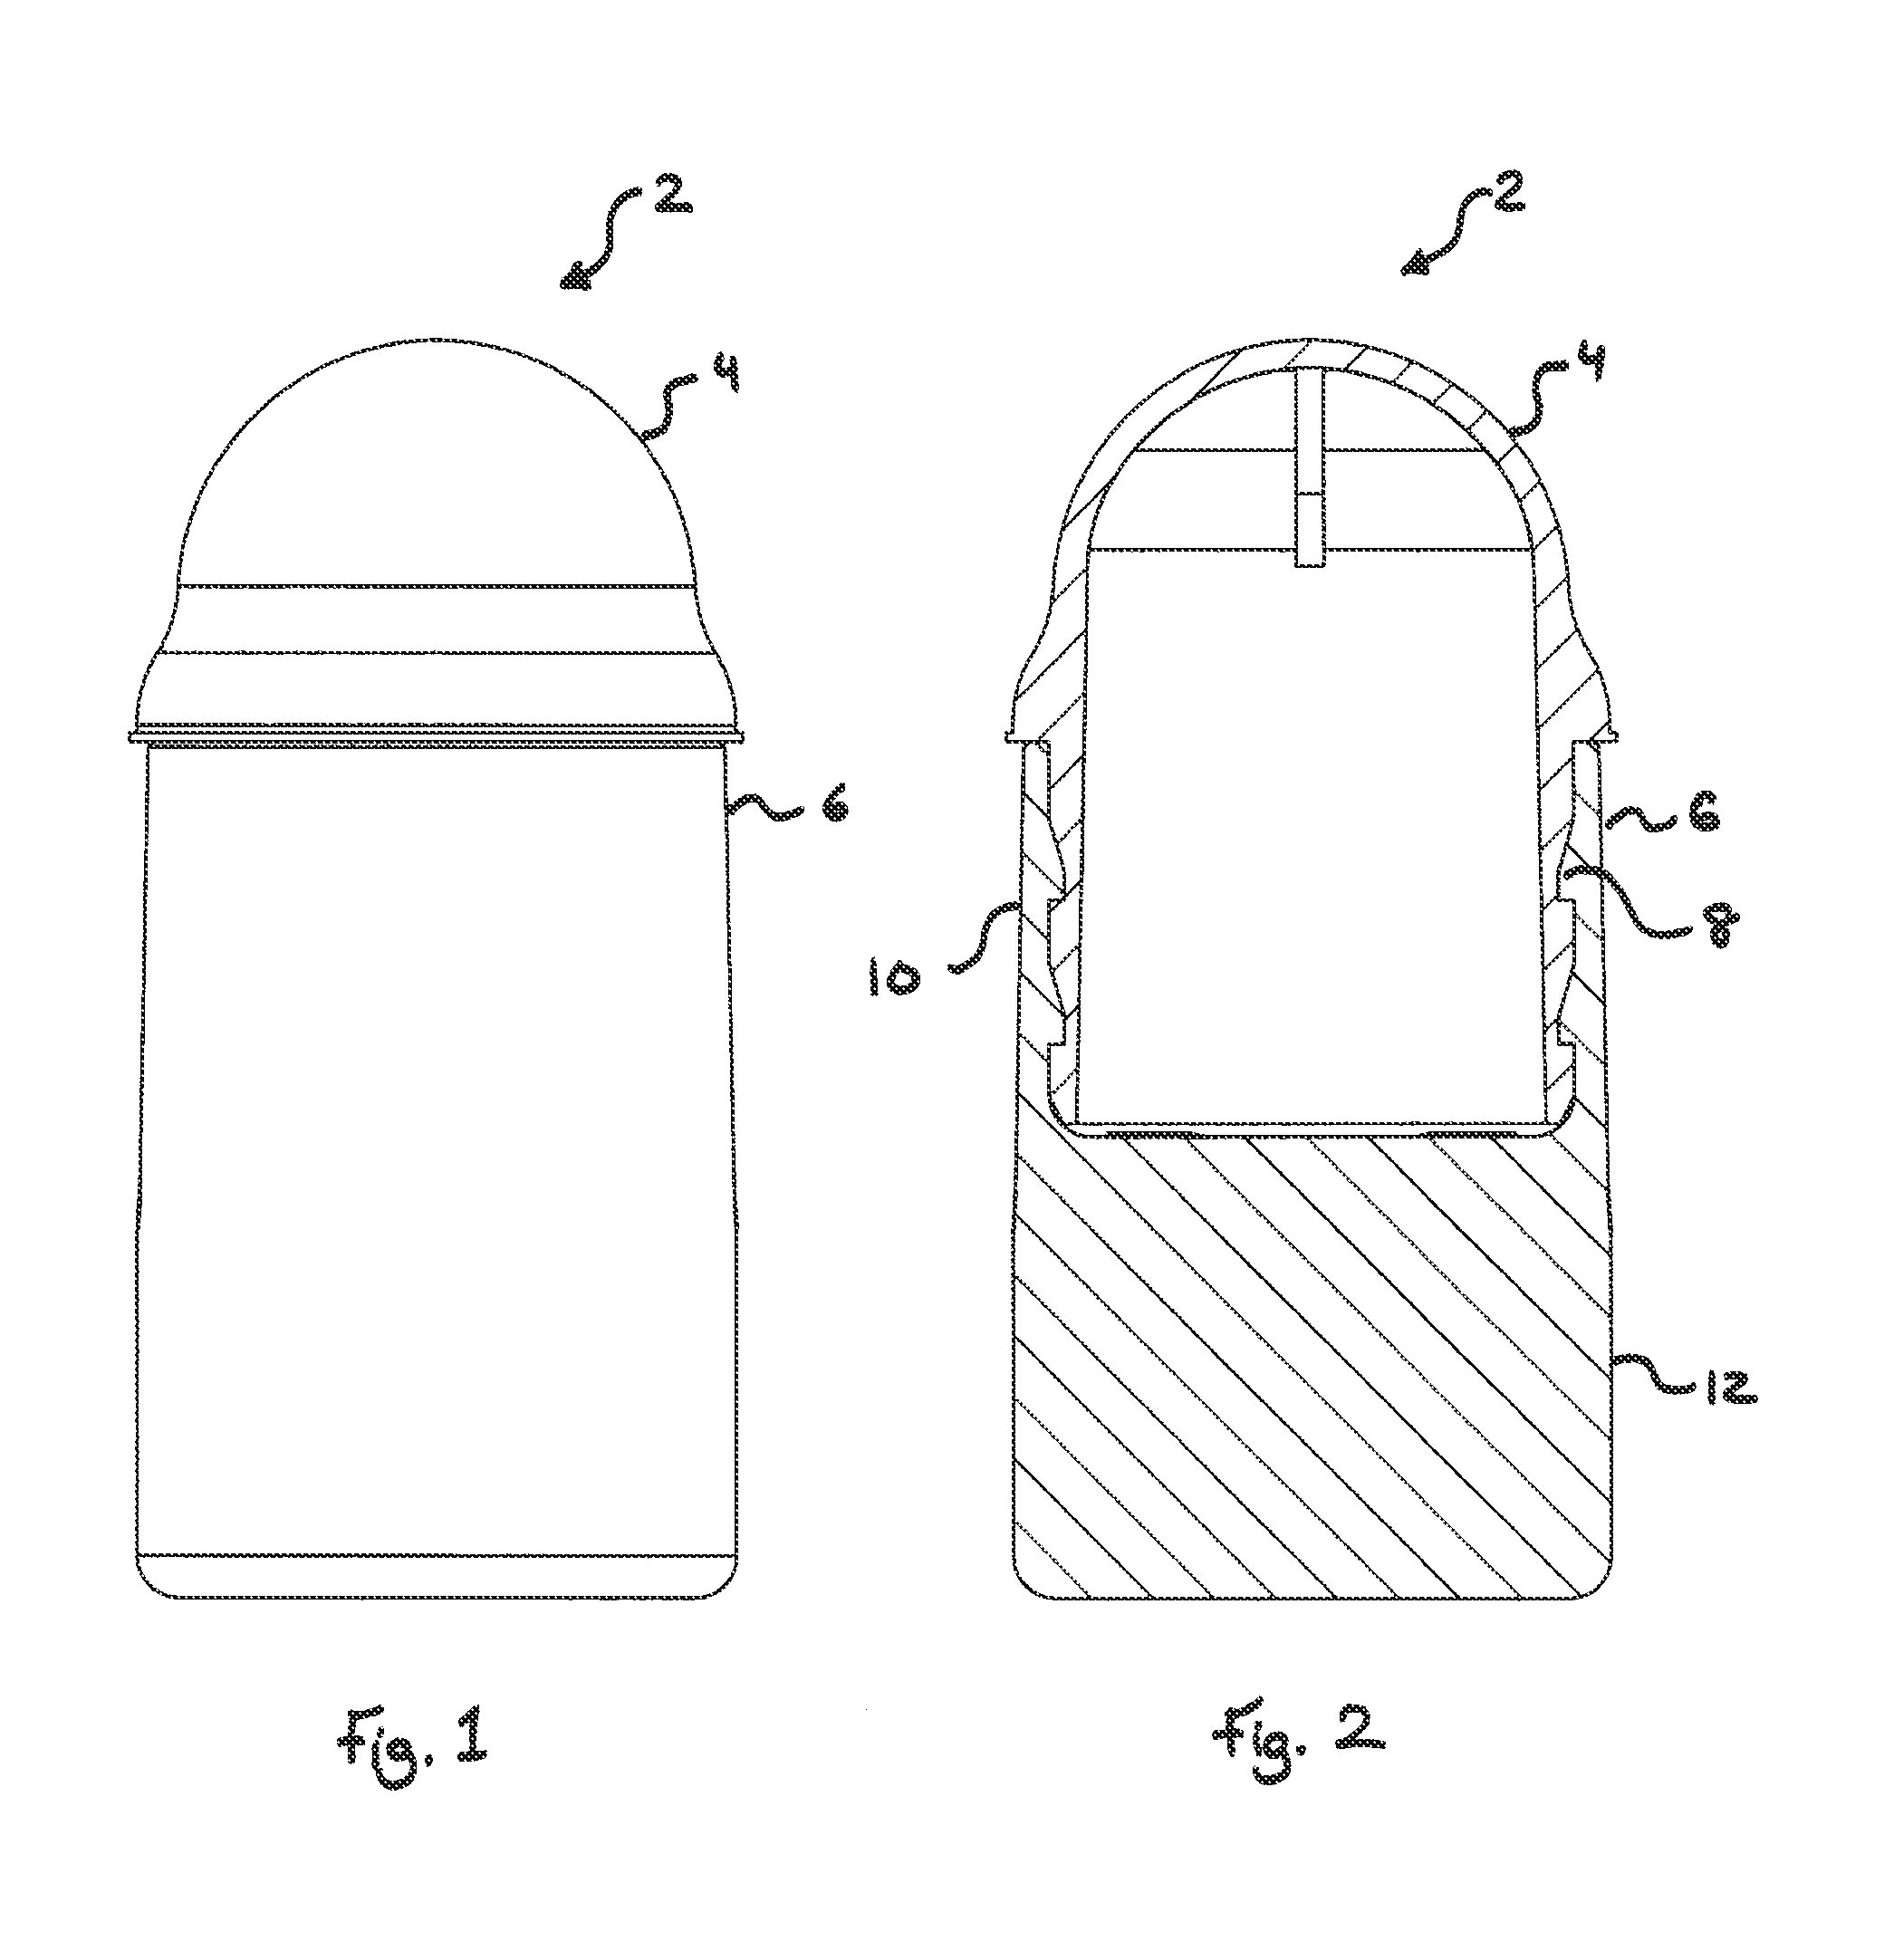 Spin-stabilized non-lethal projectile with a shear-thinning fluid